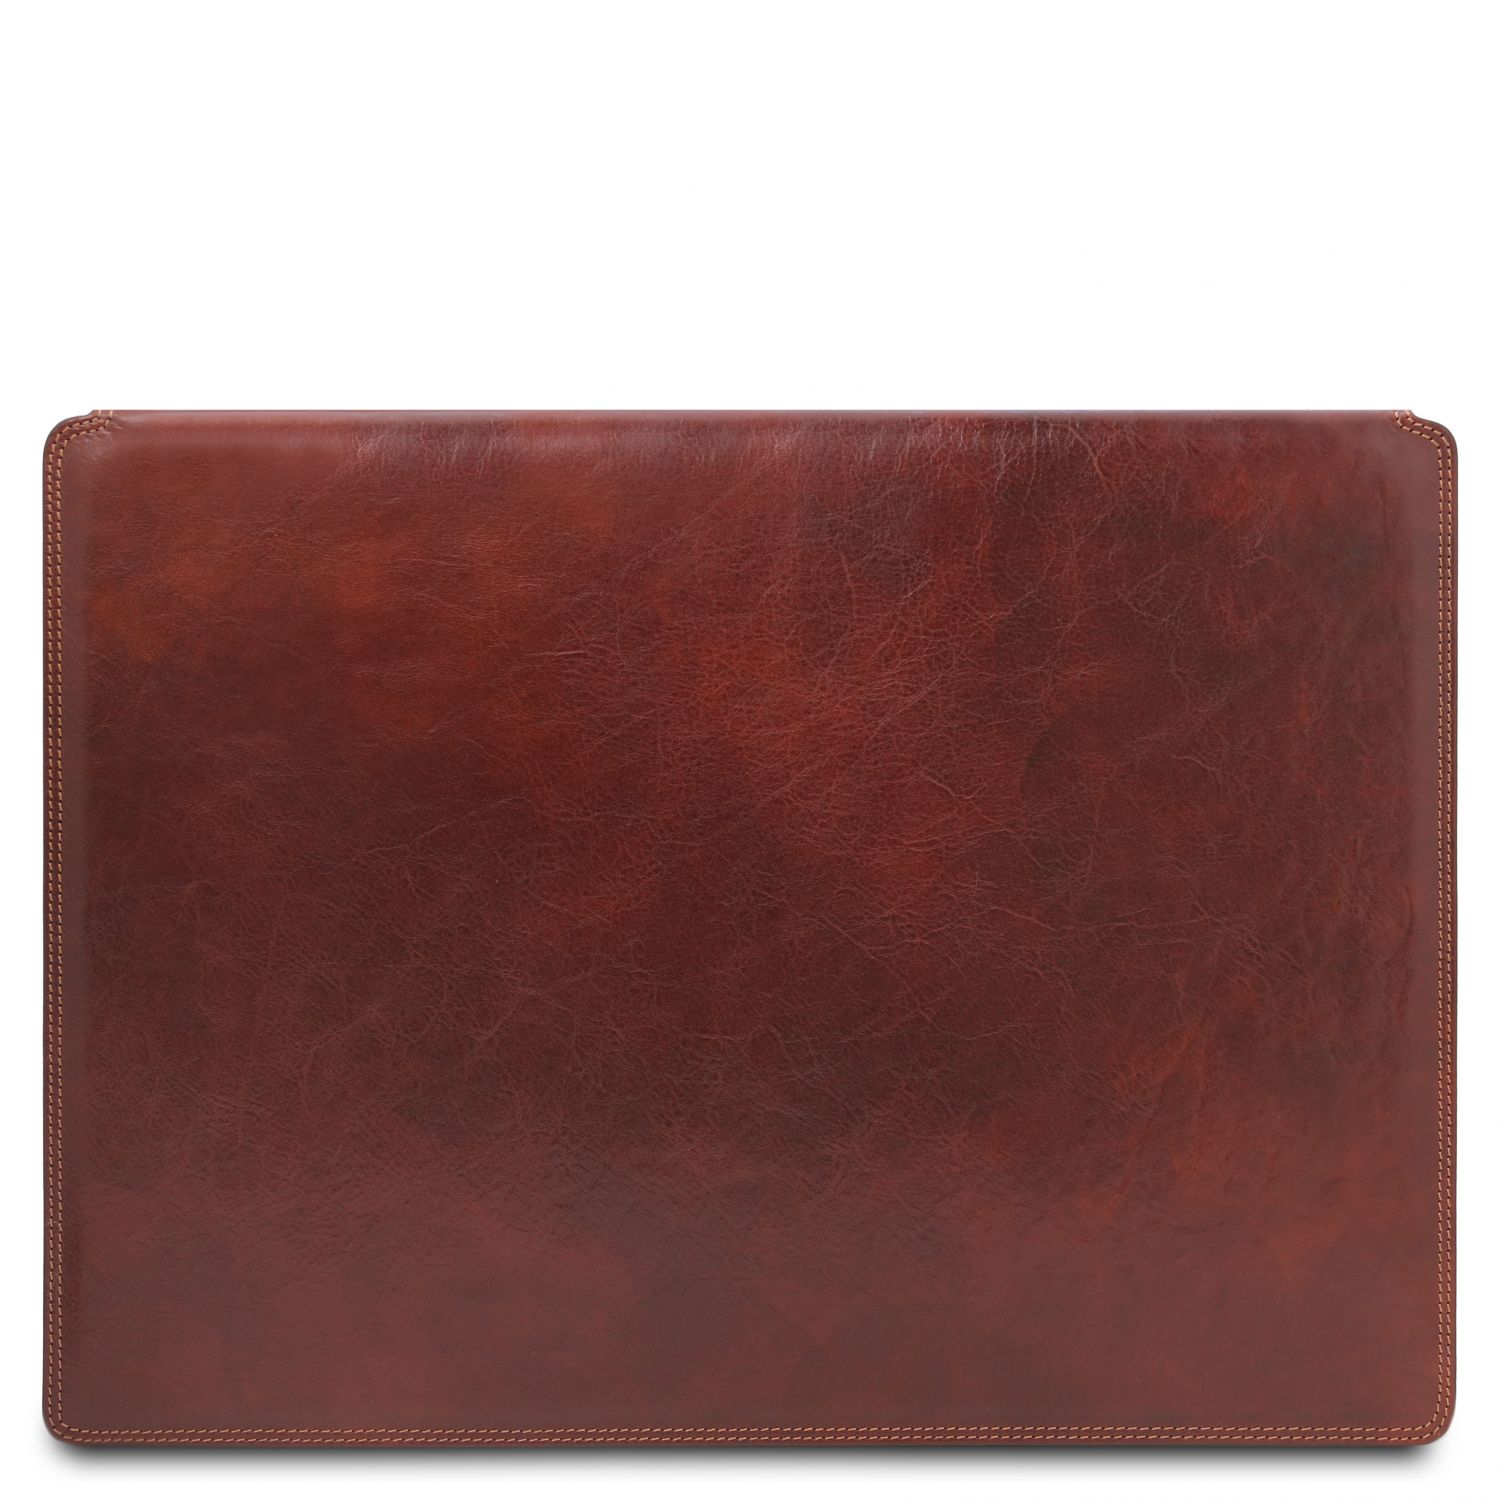 Leather Desk Pad with Inner Compartment